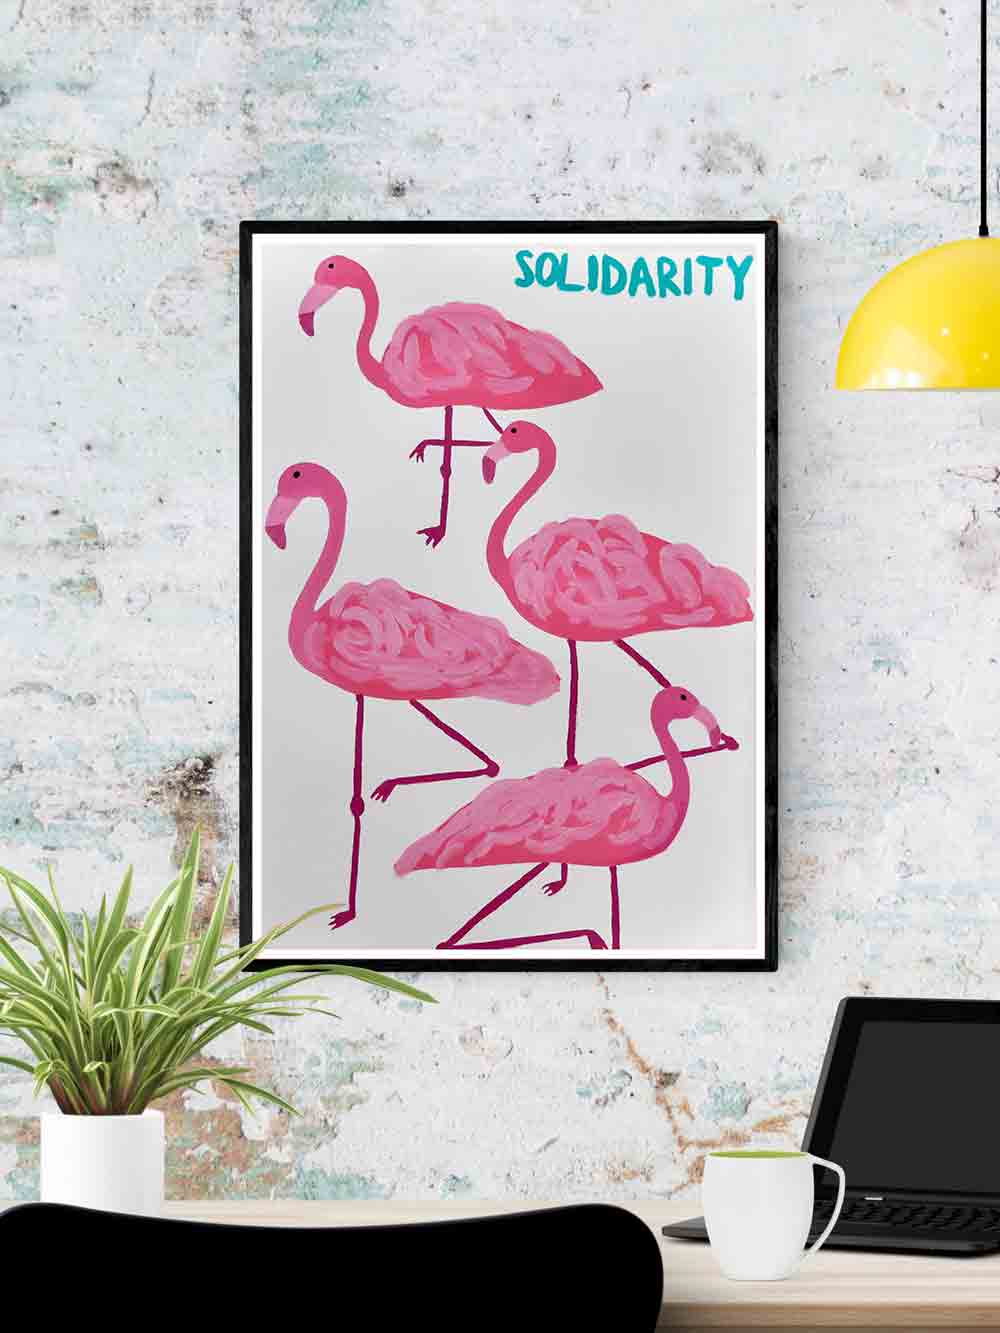 Solidarity Flamingo Wall Print in a frame on a wall